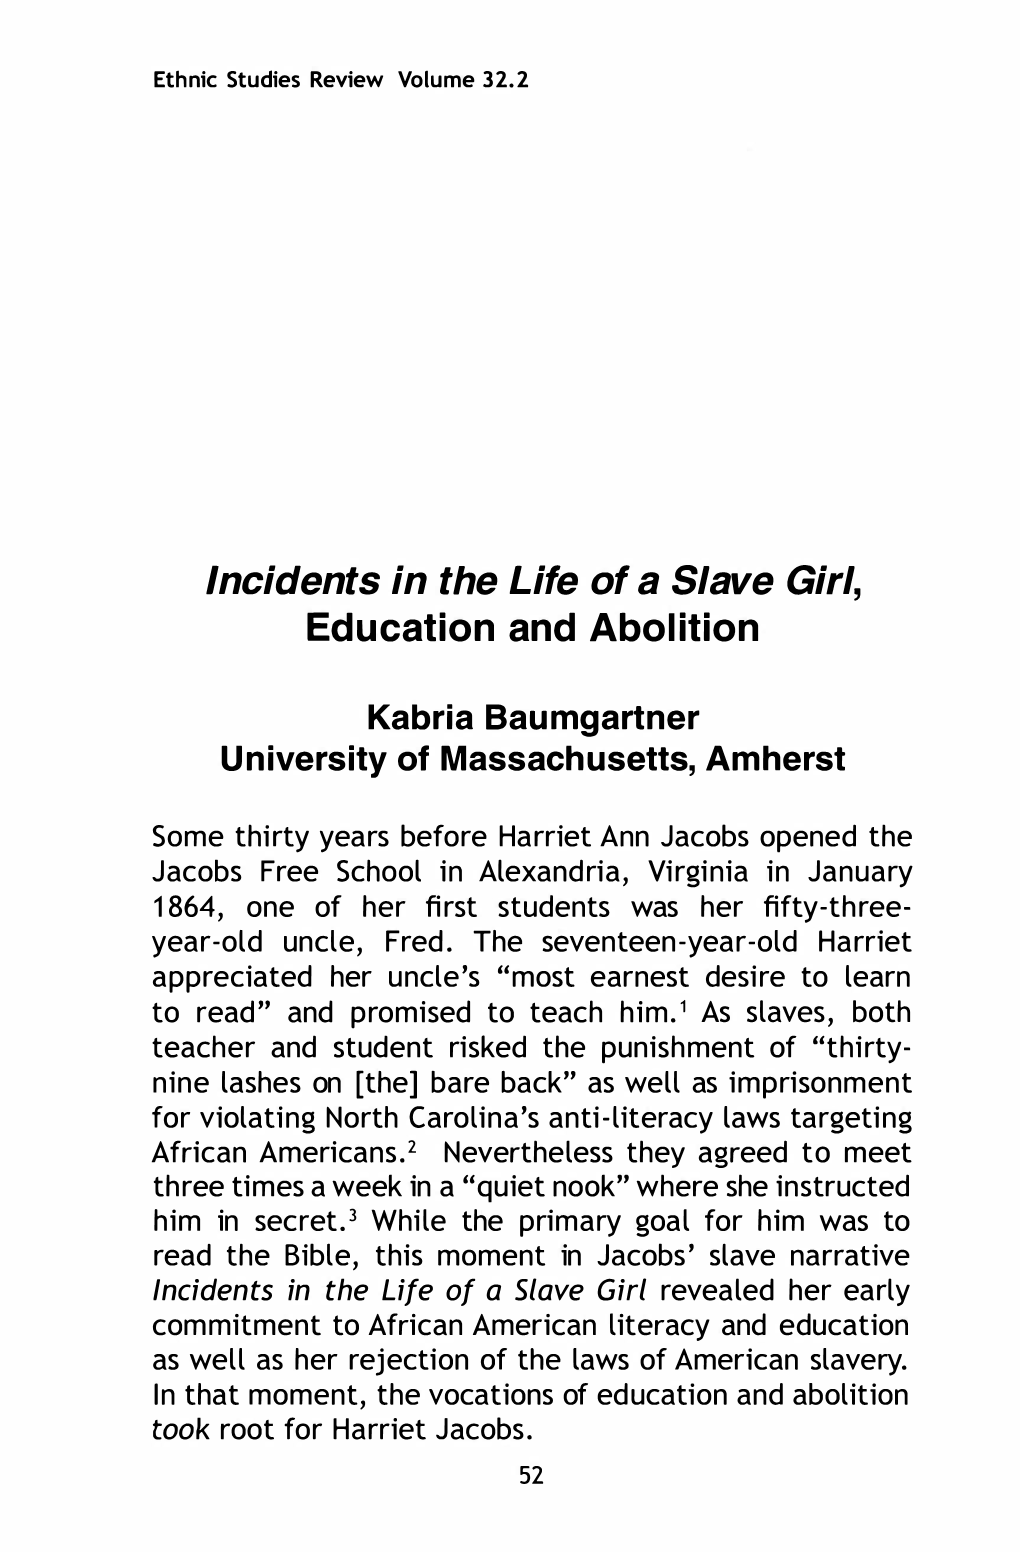 Incidents in the Life of a Slave Girl, Education and Abolition